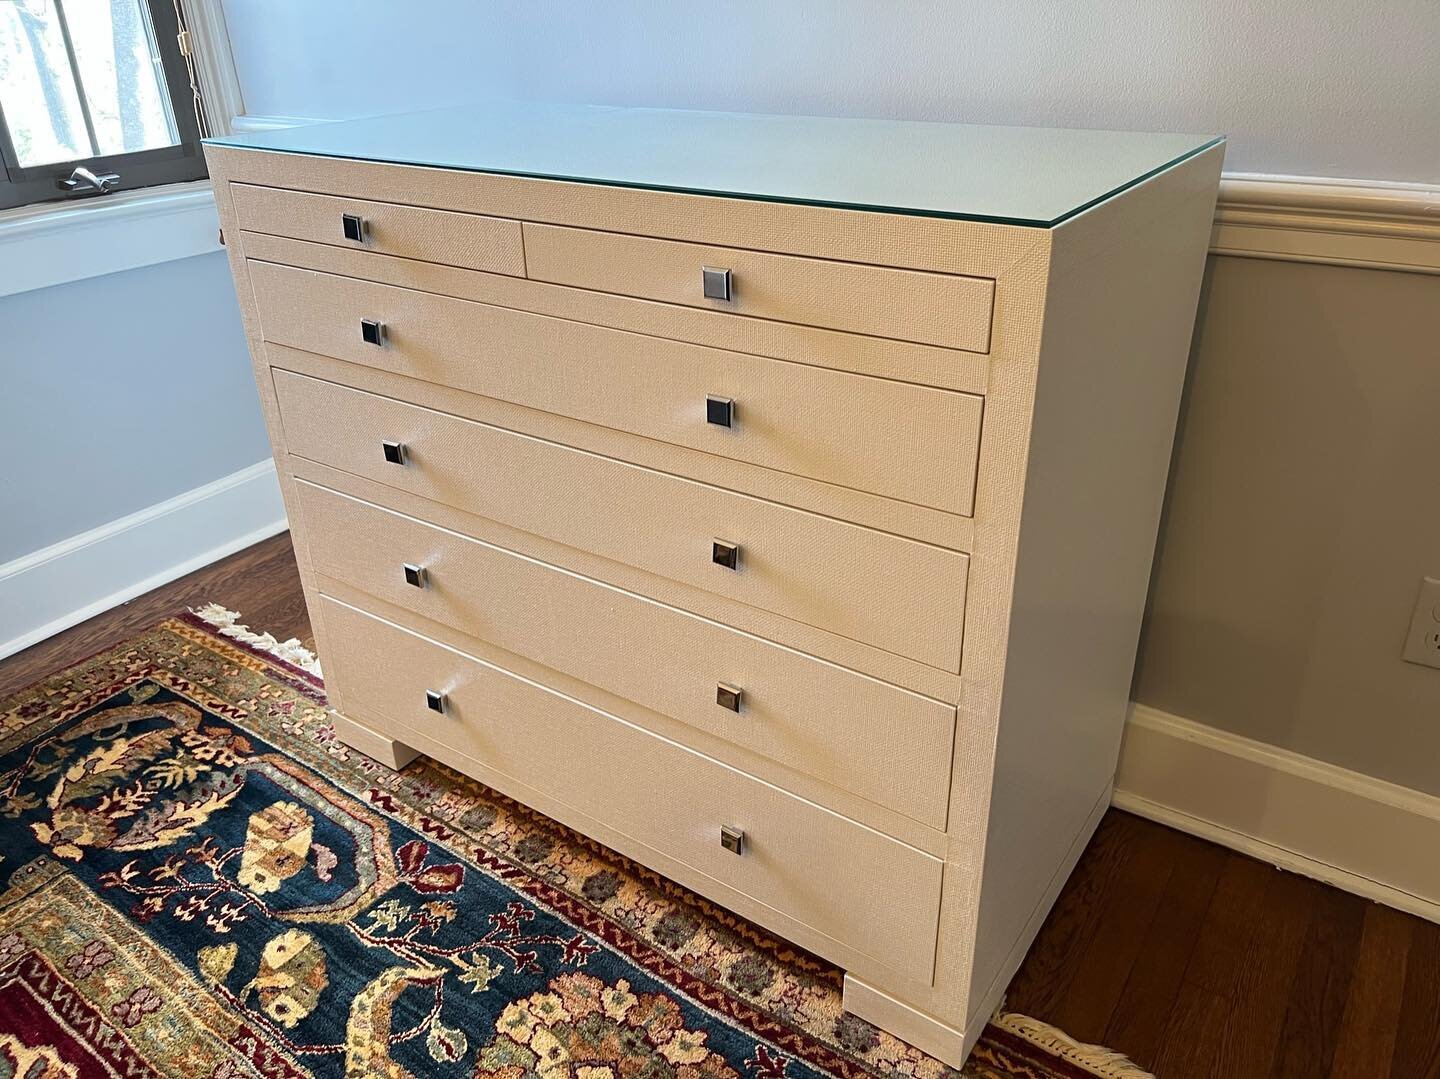 Pair of Dressers with Beveled Glass Tops
From Bungalow 5 
21 x 43.25 x 37.5 #emptyyournest #dresser #bungalow5 #interiordesign #interiordesigner #homedecor #upcycle #estatesale #estatesalefinds #bedroomdesign #bedroomdecor #shoplocal #shopsmall #summ